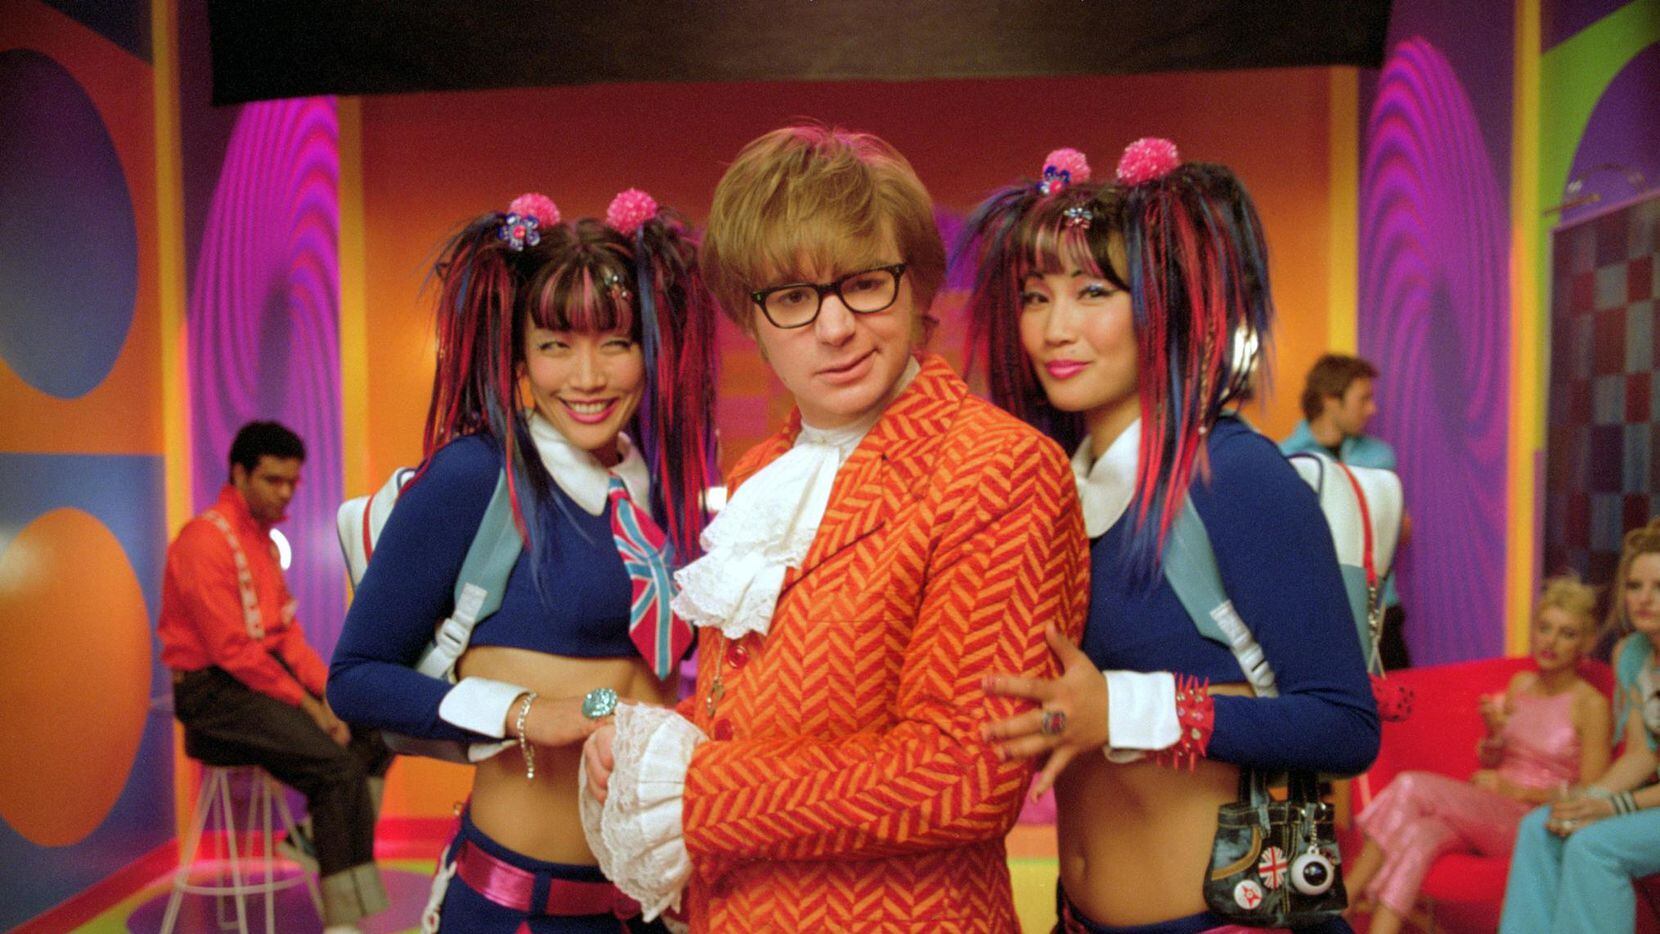 The "Austin Powers" spy-action series includes three movies, which means you've got lots of...